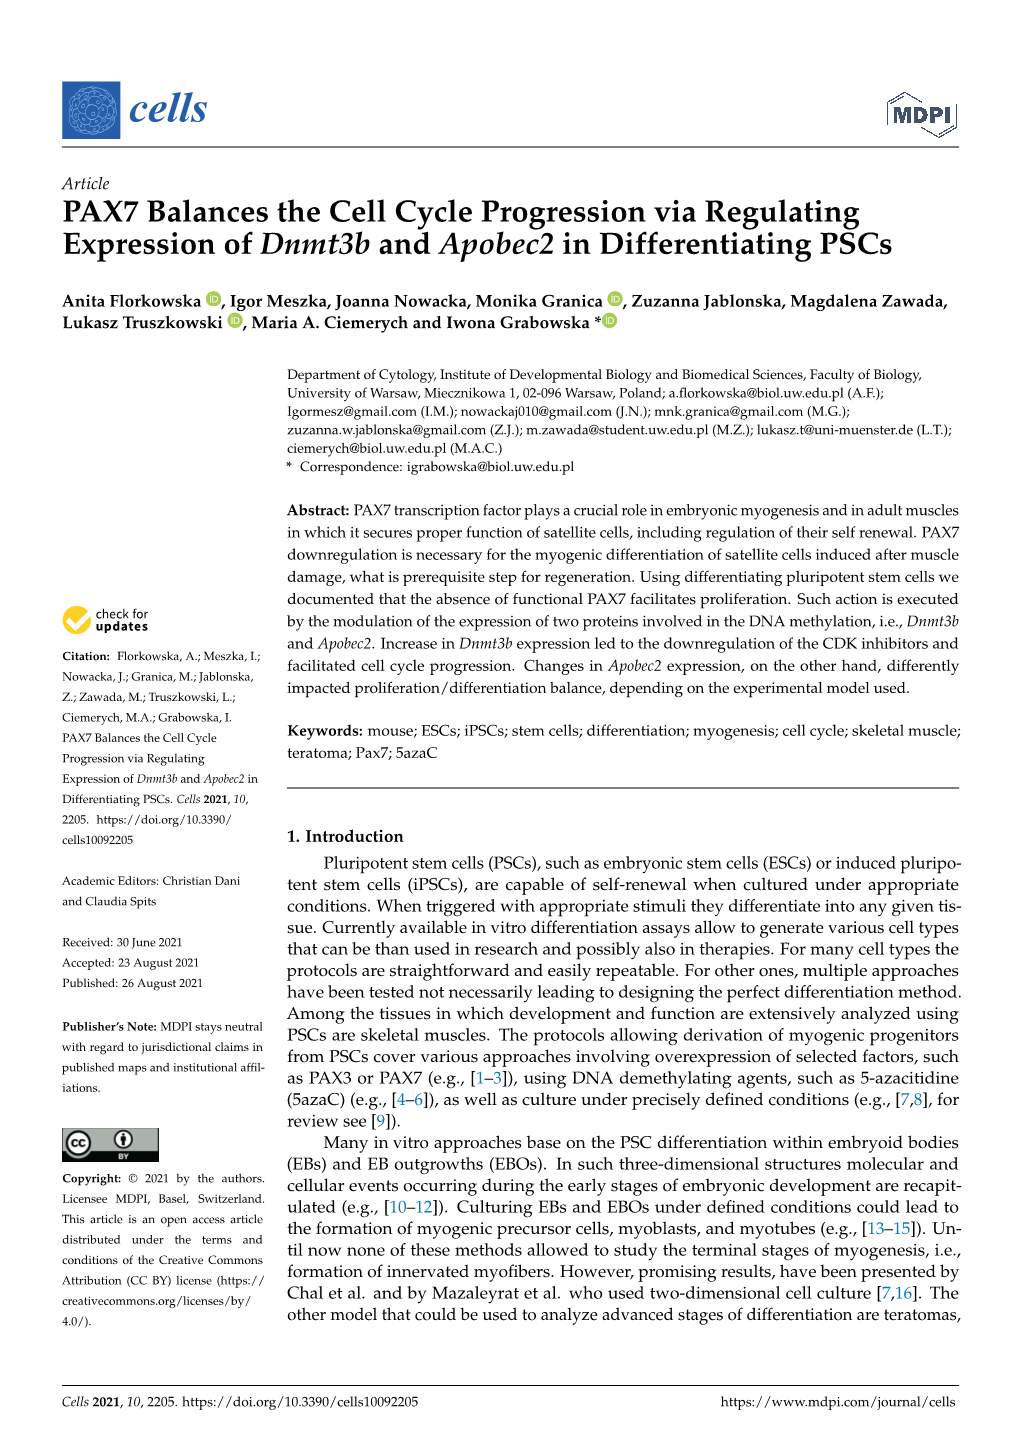 PAX7 Balances the Cell Cycle Progression Via Regulating Expression of Dnmt3b and Apobec2 in Differentiating Pscs